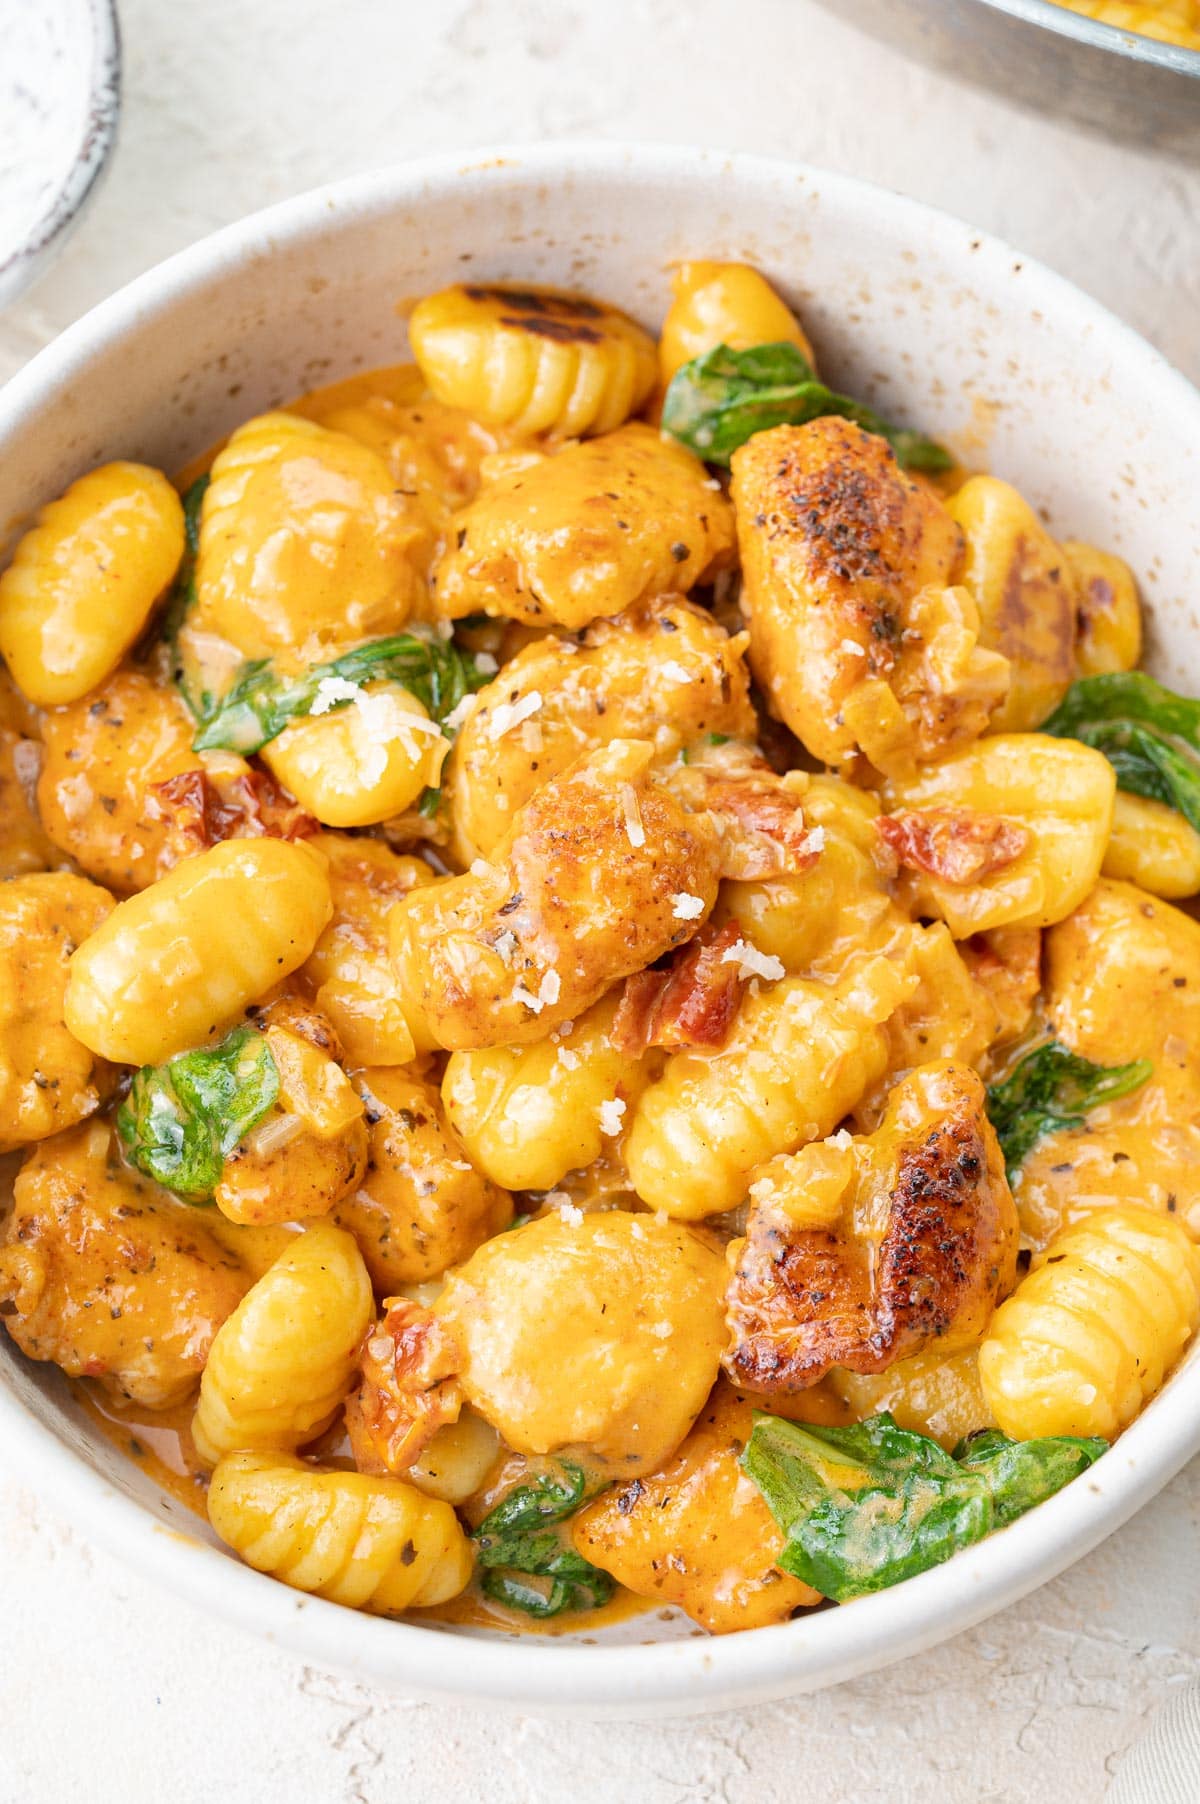 Creamy Tuscan chicken with gnocchi and spinach in a white bowl.